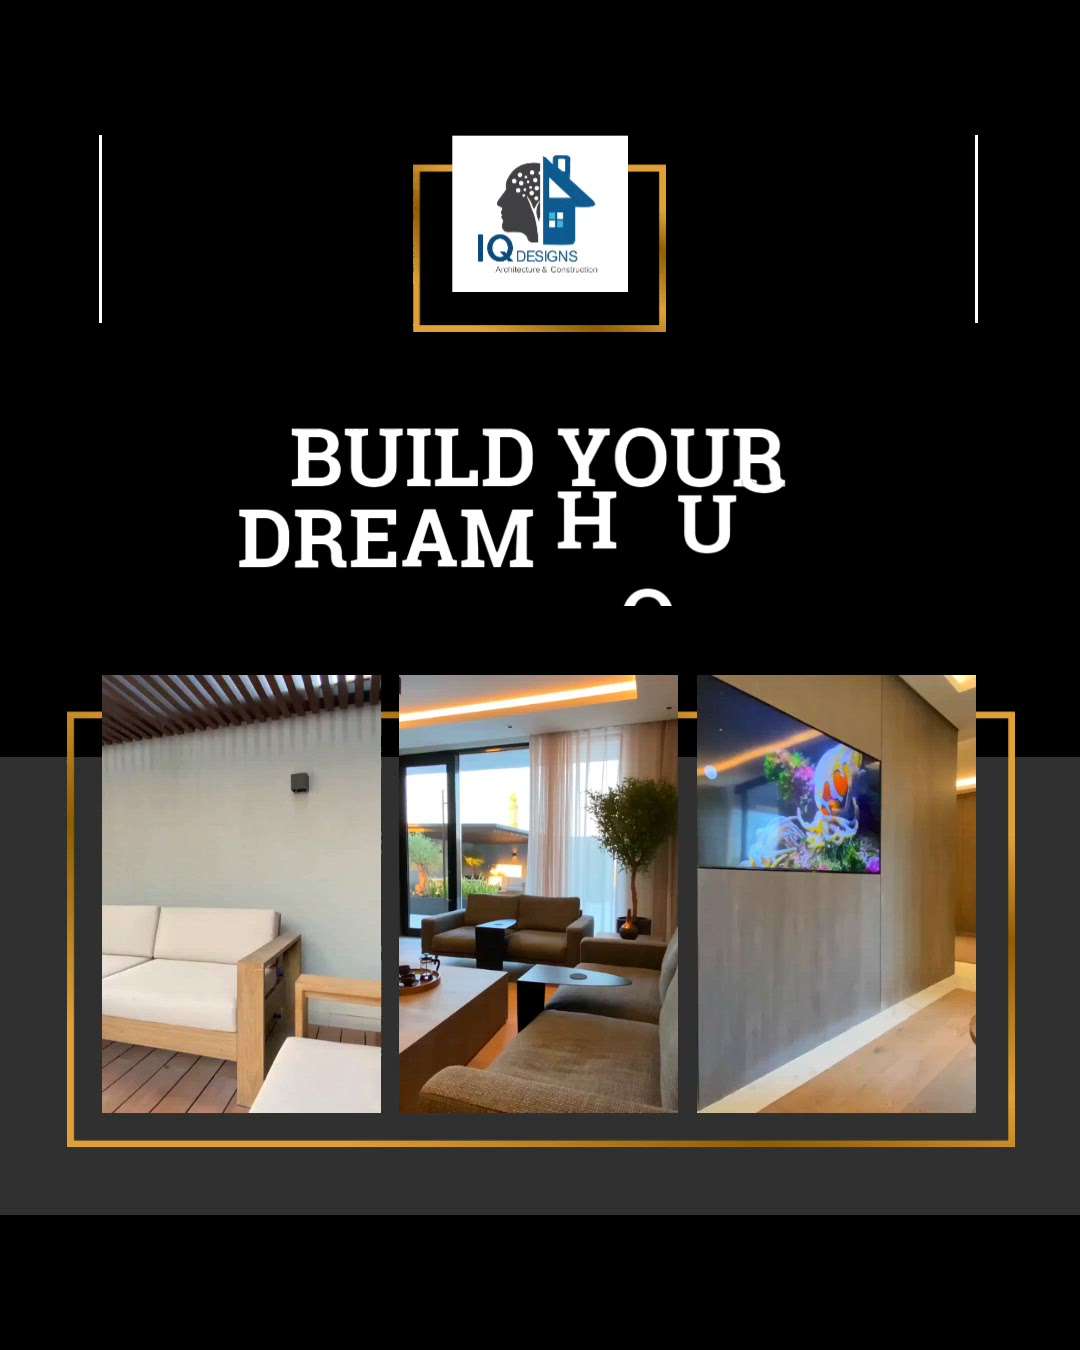 Our Best Service Make your Home Best🏠
⚒️

.#construction #newconstruction #underconstruction #bodyunderconstruction #constructionlife #constructionsite #constructionworker #reconstruction #civilconstruction #constructionmanagement #constructions #deconstruction #constructionequipment #preconstruction #landscapeconstruction #womeninconstruction #constructionmaison
 #newhomeconstruction